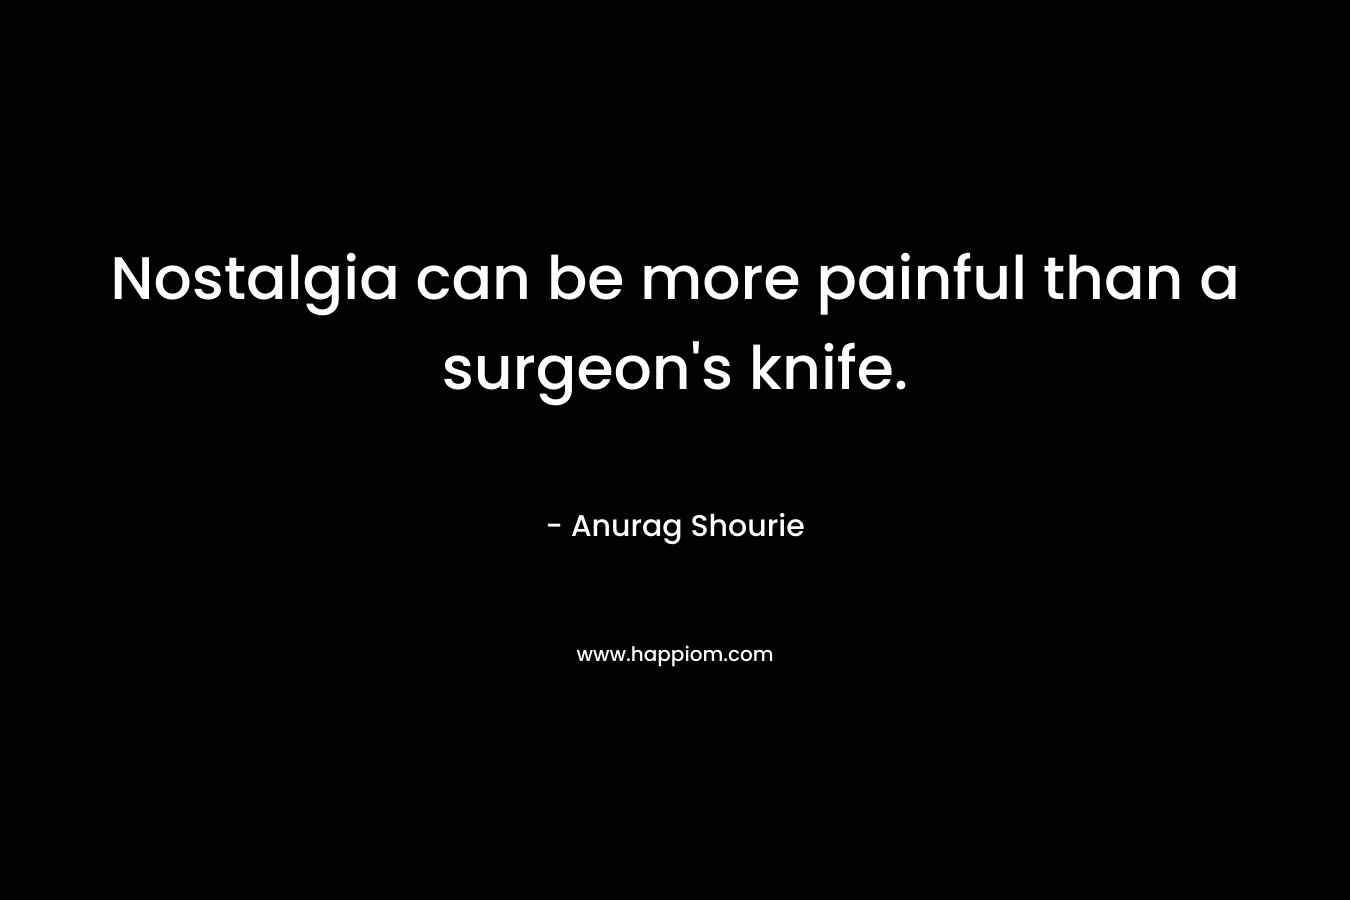 Nostalgia can be more painful than a surgeon's knife.